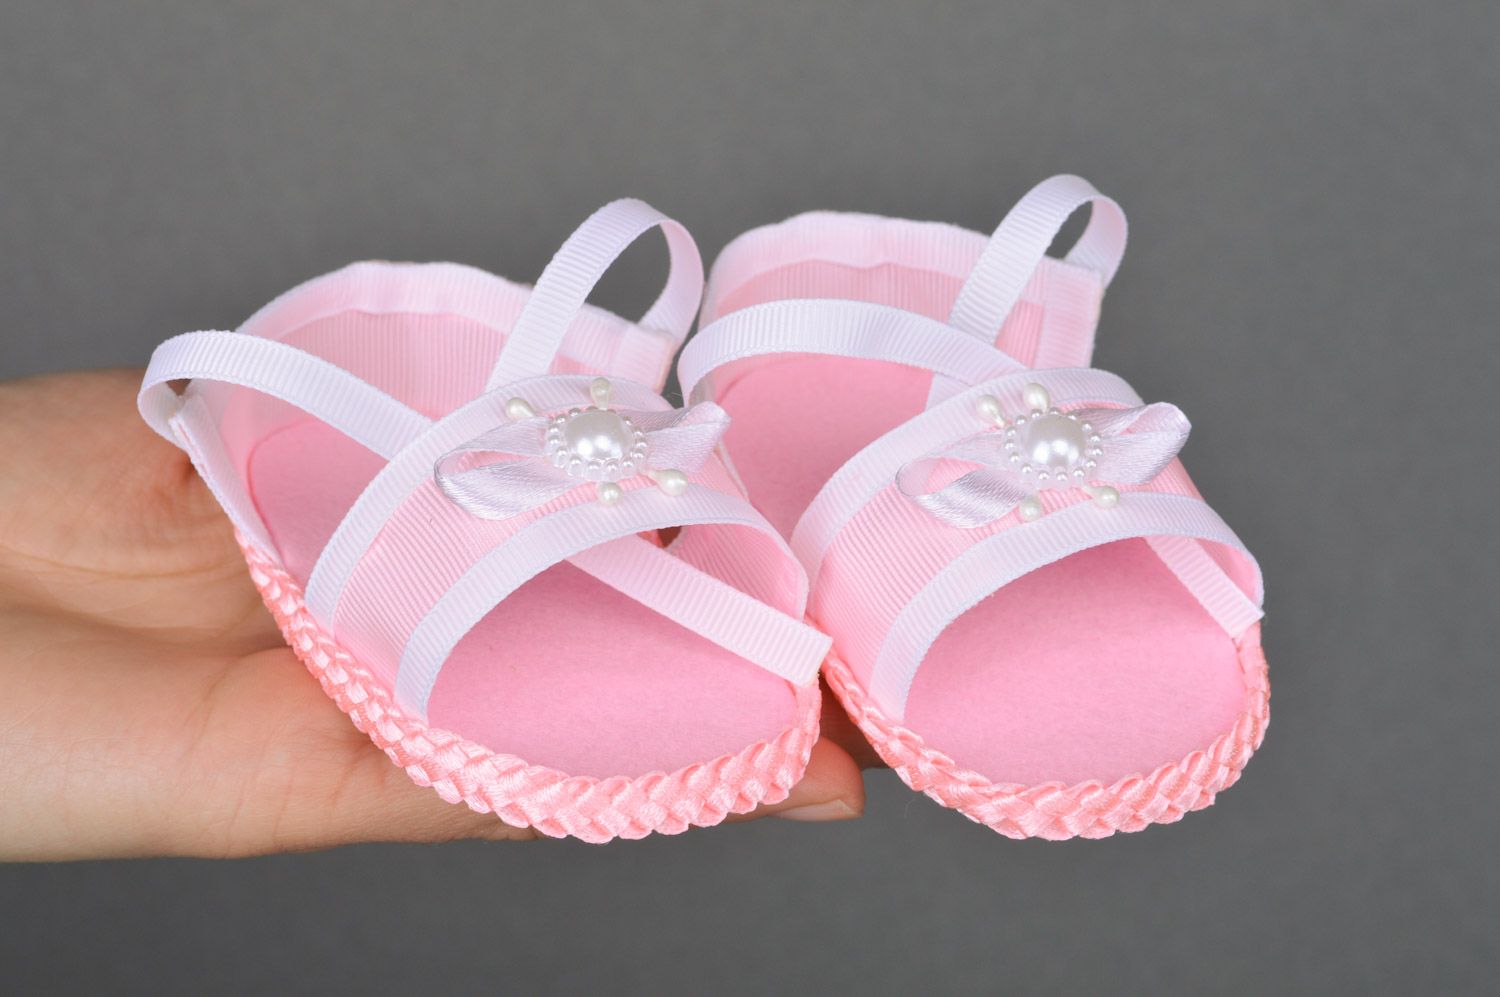 Handmade beautiful pink baby girl sandals sewn of felt and rep ribbons photo 2